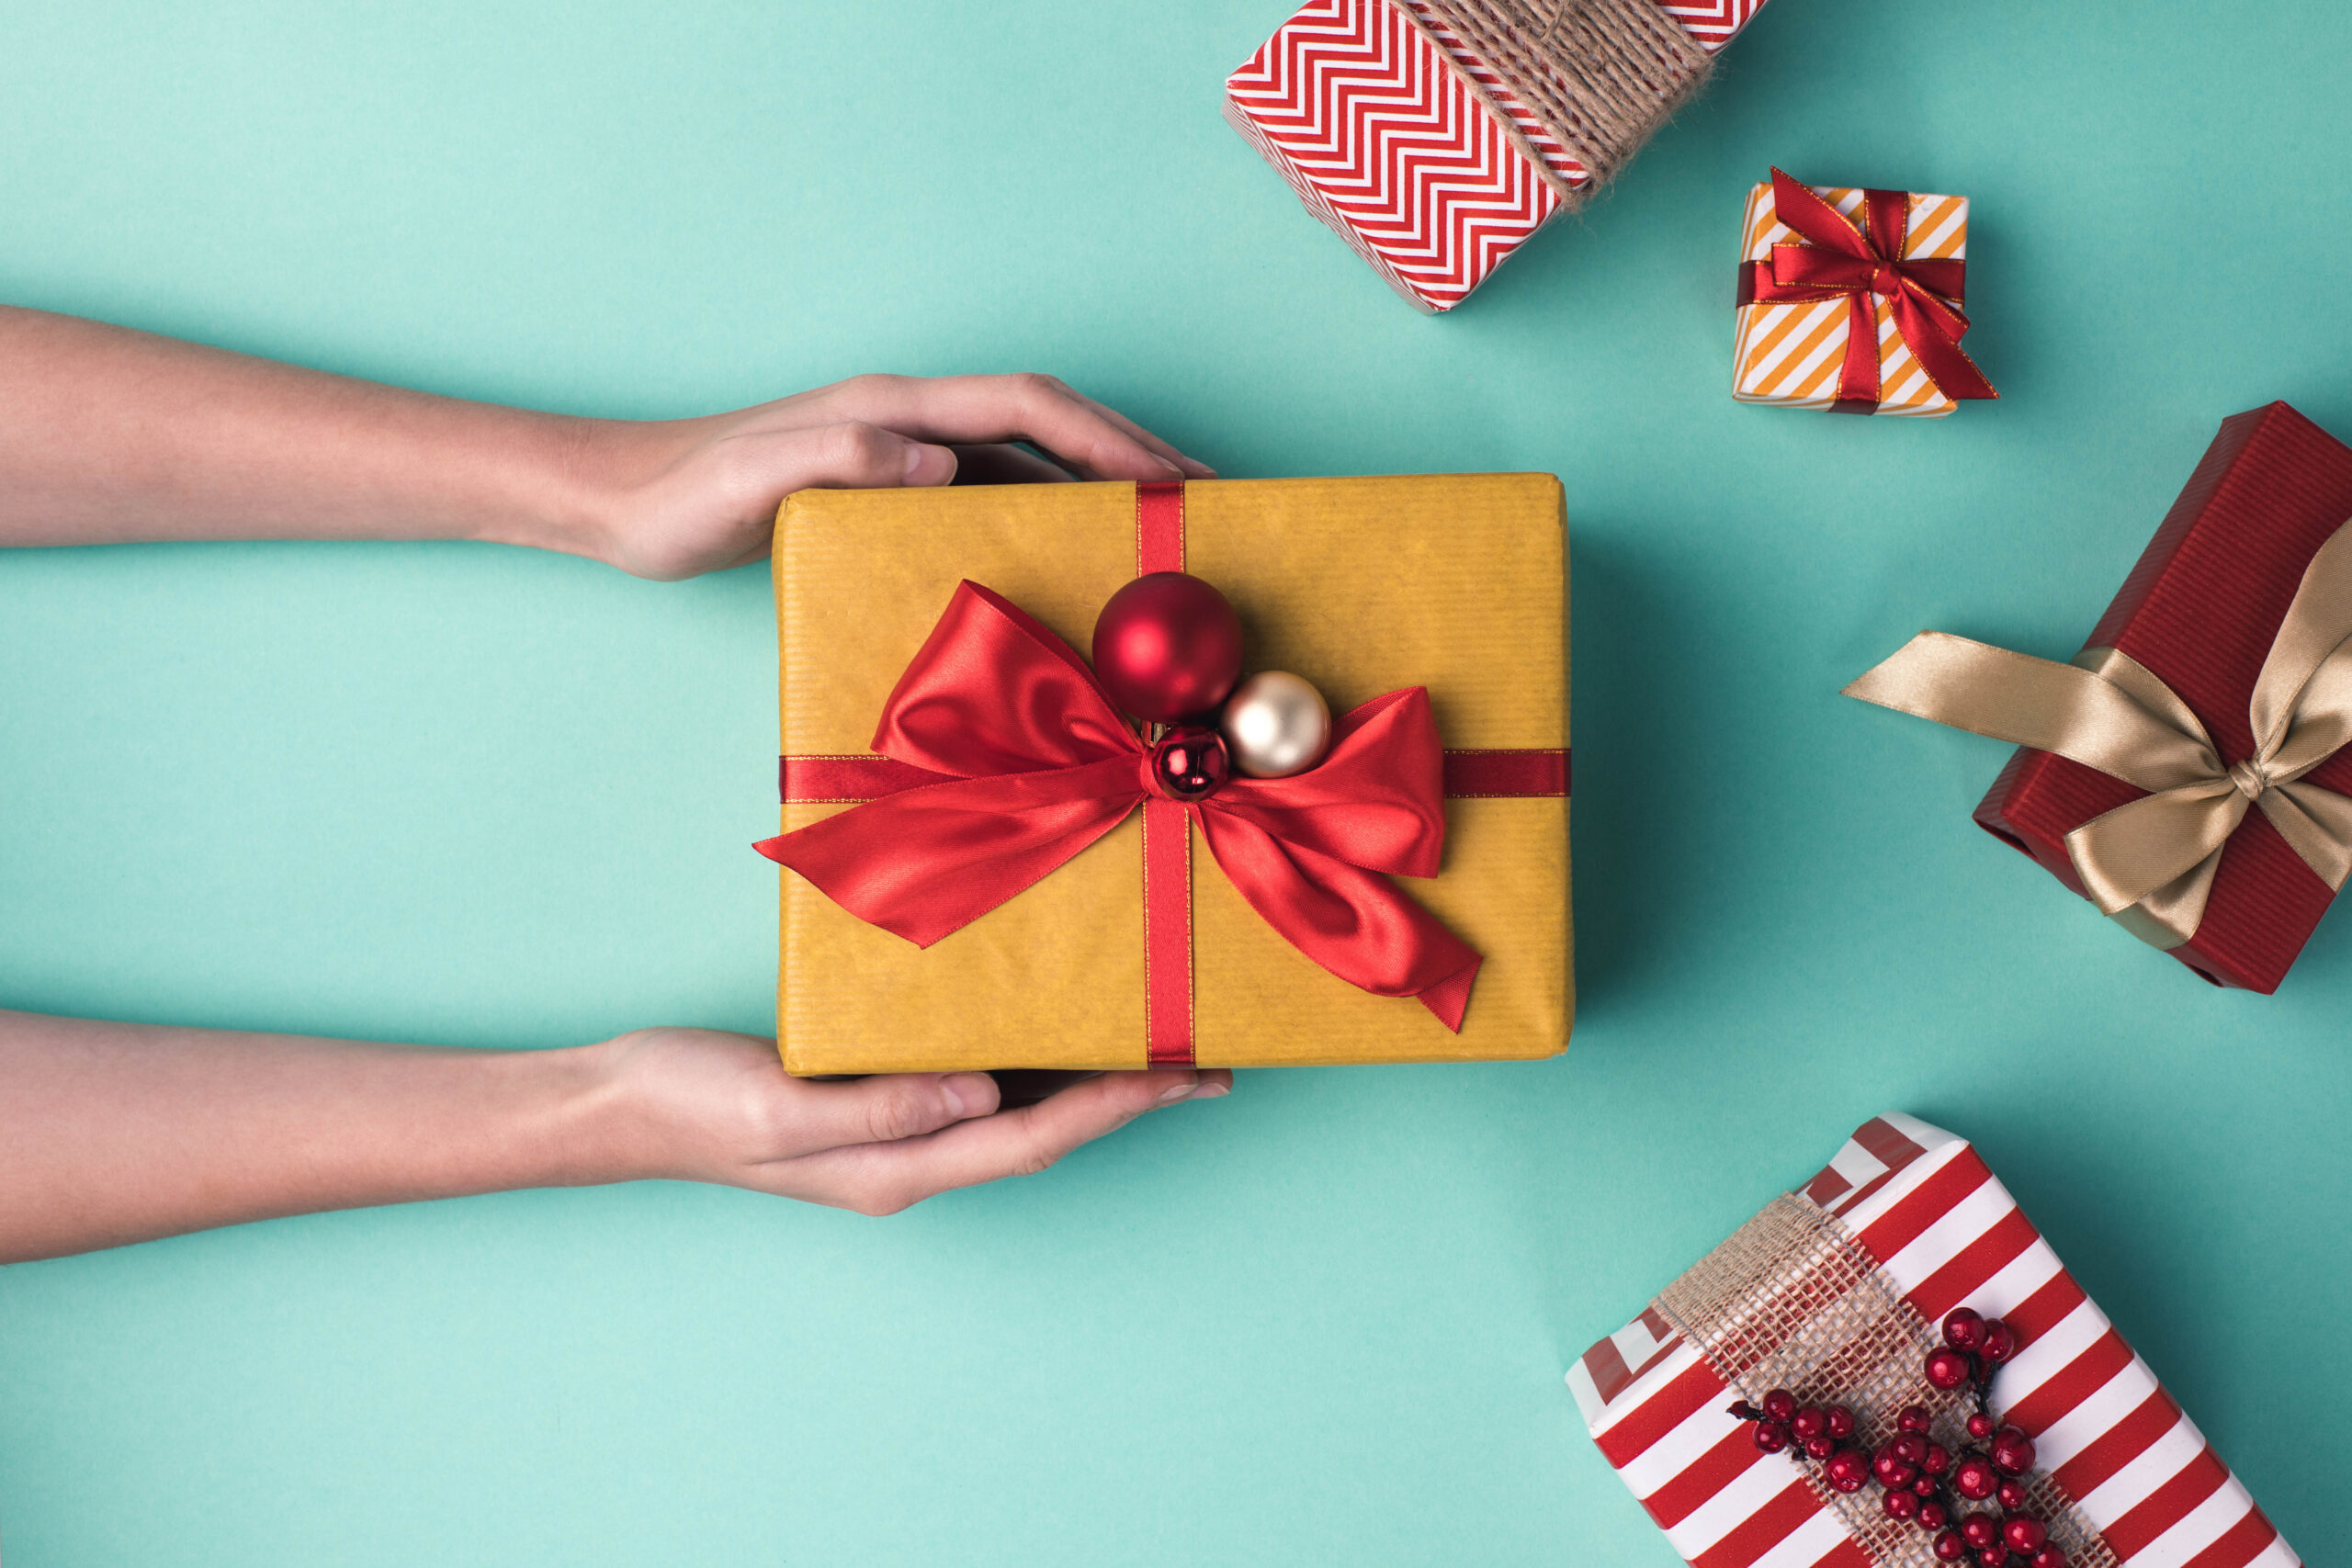 Exchange Gifts synonyms - 14 Words and Phrases for Exchange Gifts